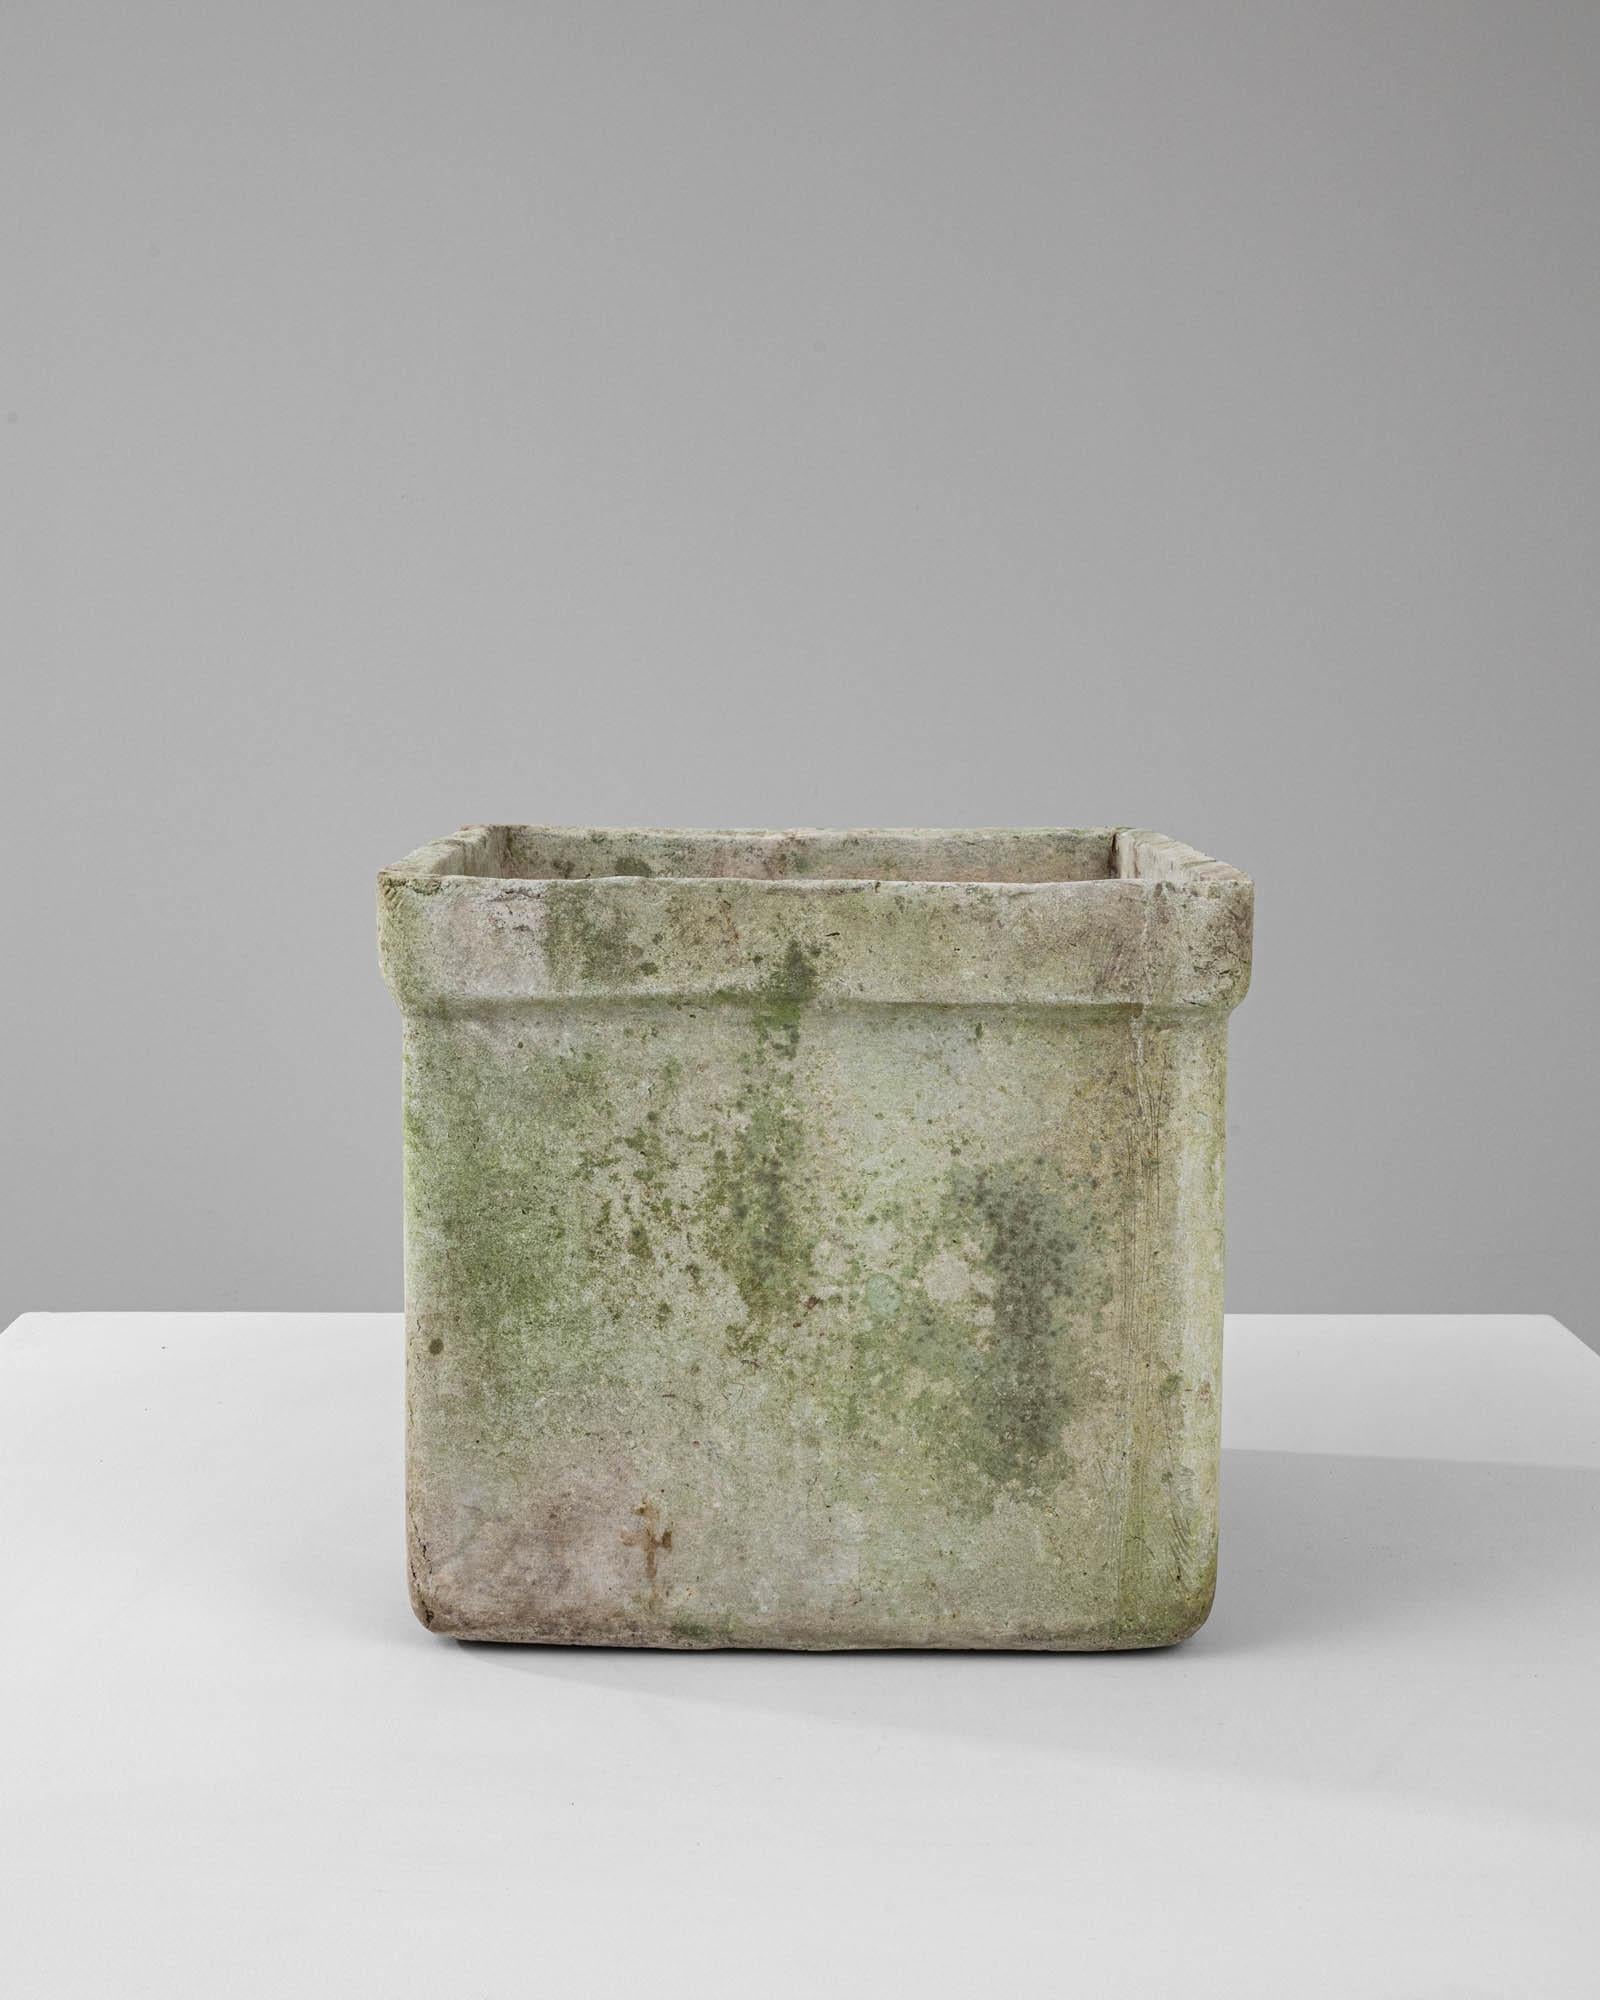 This 1950s French concrete planter embodies the strength and simplicity of post-war design. With its square form and sturdy edges, it brings a sense of solidity and permanence to any garden or outdoor area. The surface is seasoned with moss and